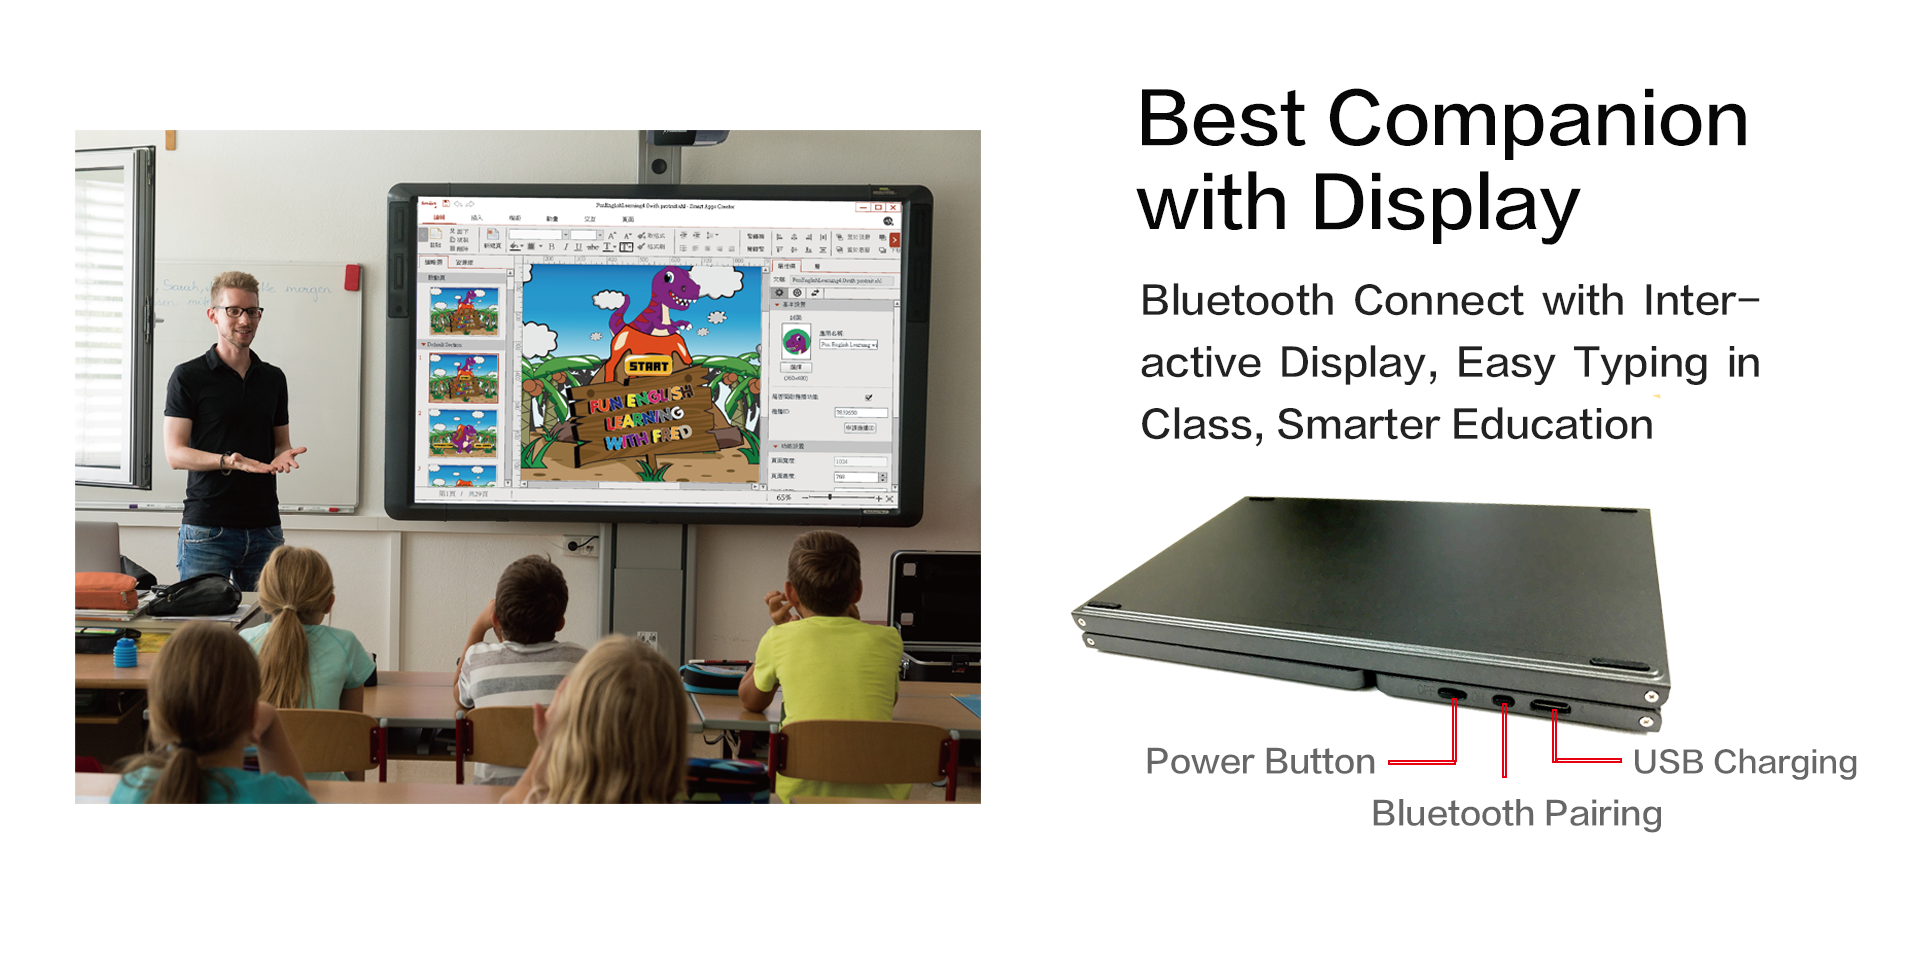 Bluetooth Connect with Interactive Display, Easy Typing in Class, Smarter Education